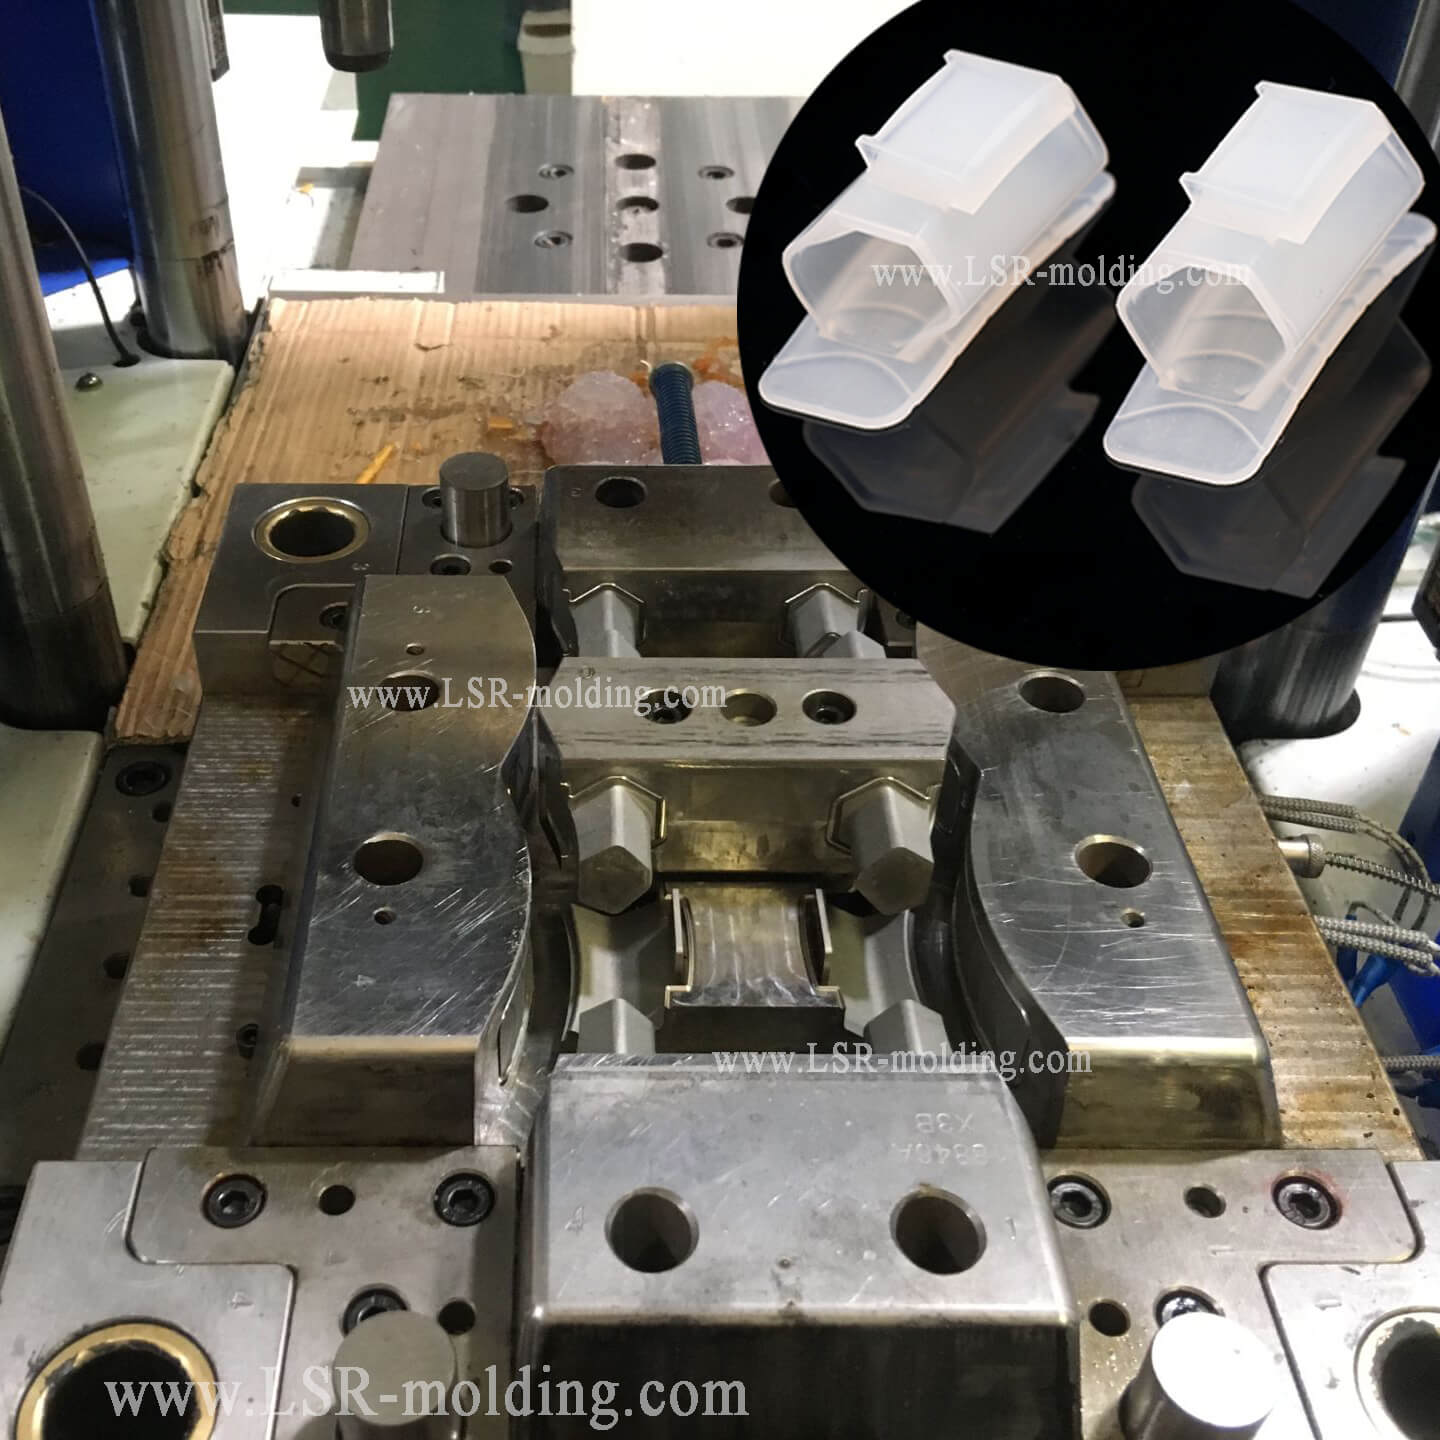 Liquid Silicon Rubber Injection Molding